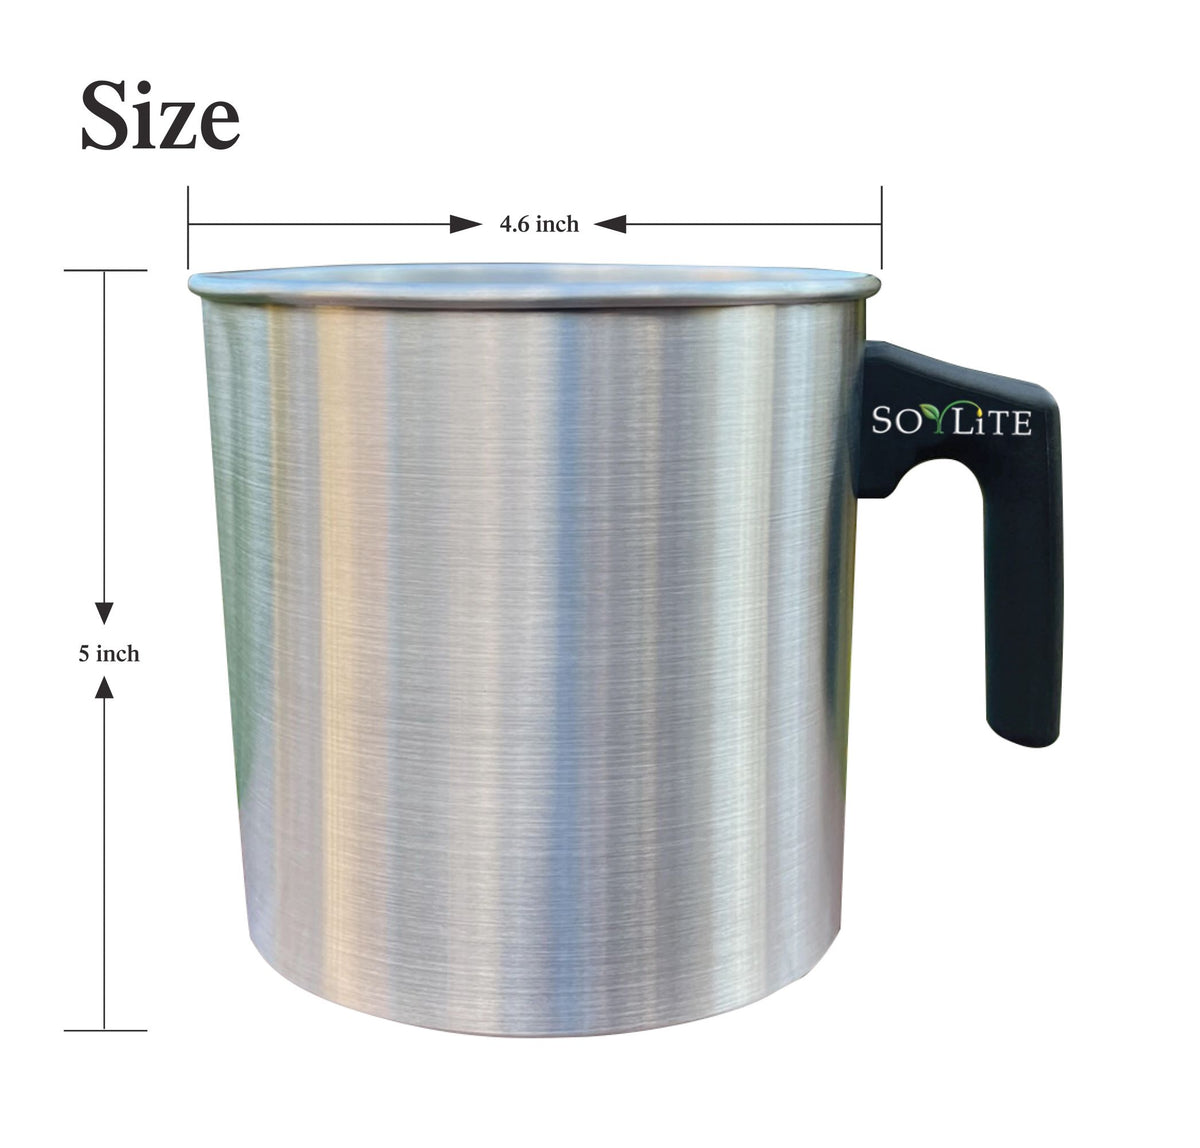 Wax Melter For Candle Making, This Wax Warmer Will Hold 7 Qts Of Melte –  Soy Lite Candle Supplies